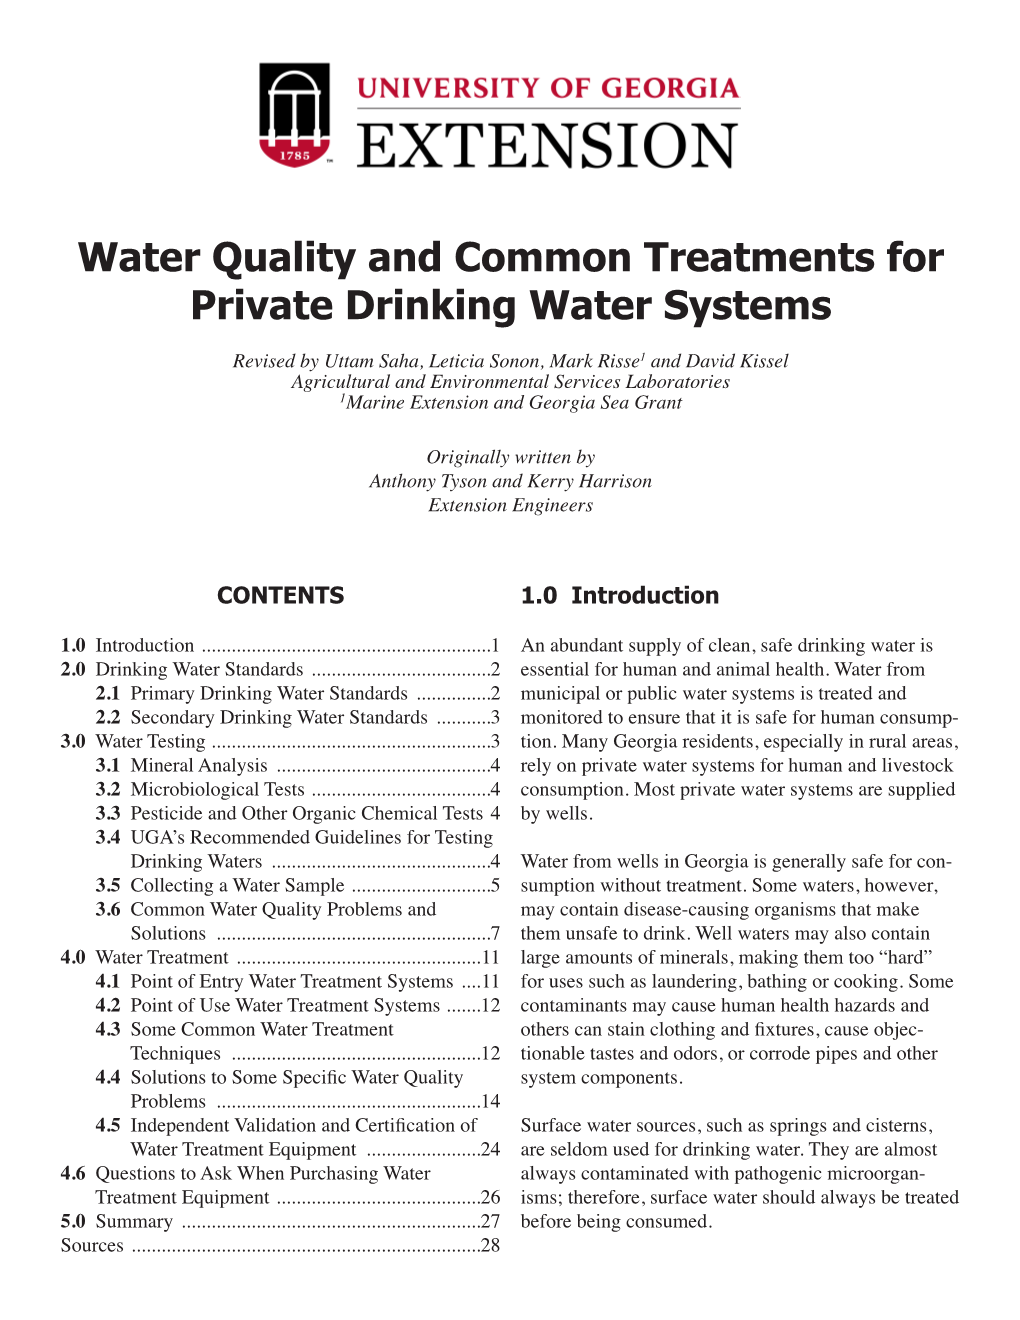 Water Quality and Common Treatments for Private Drinking Water Systems